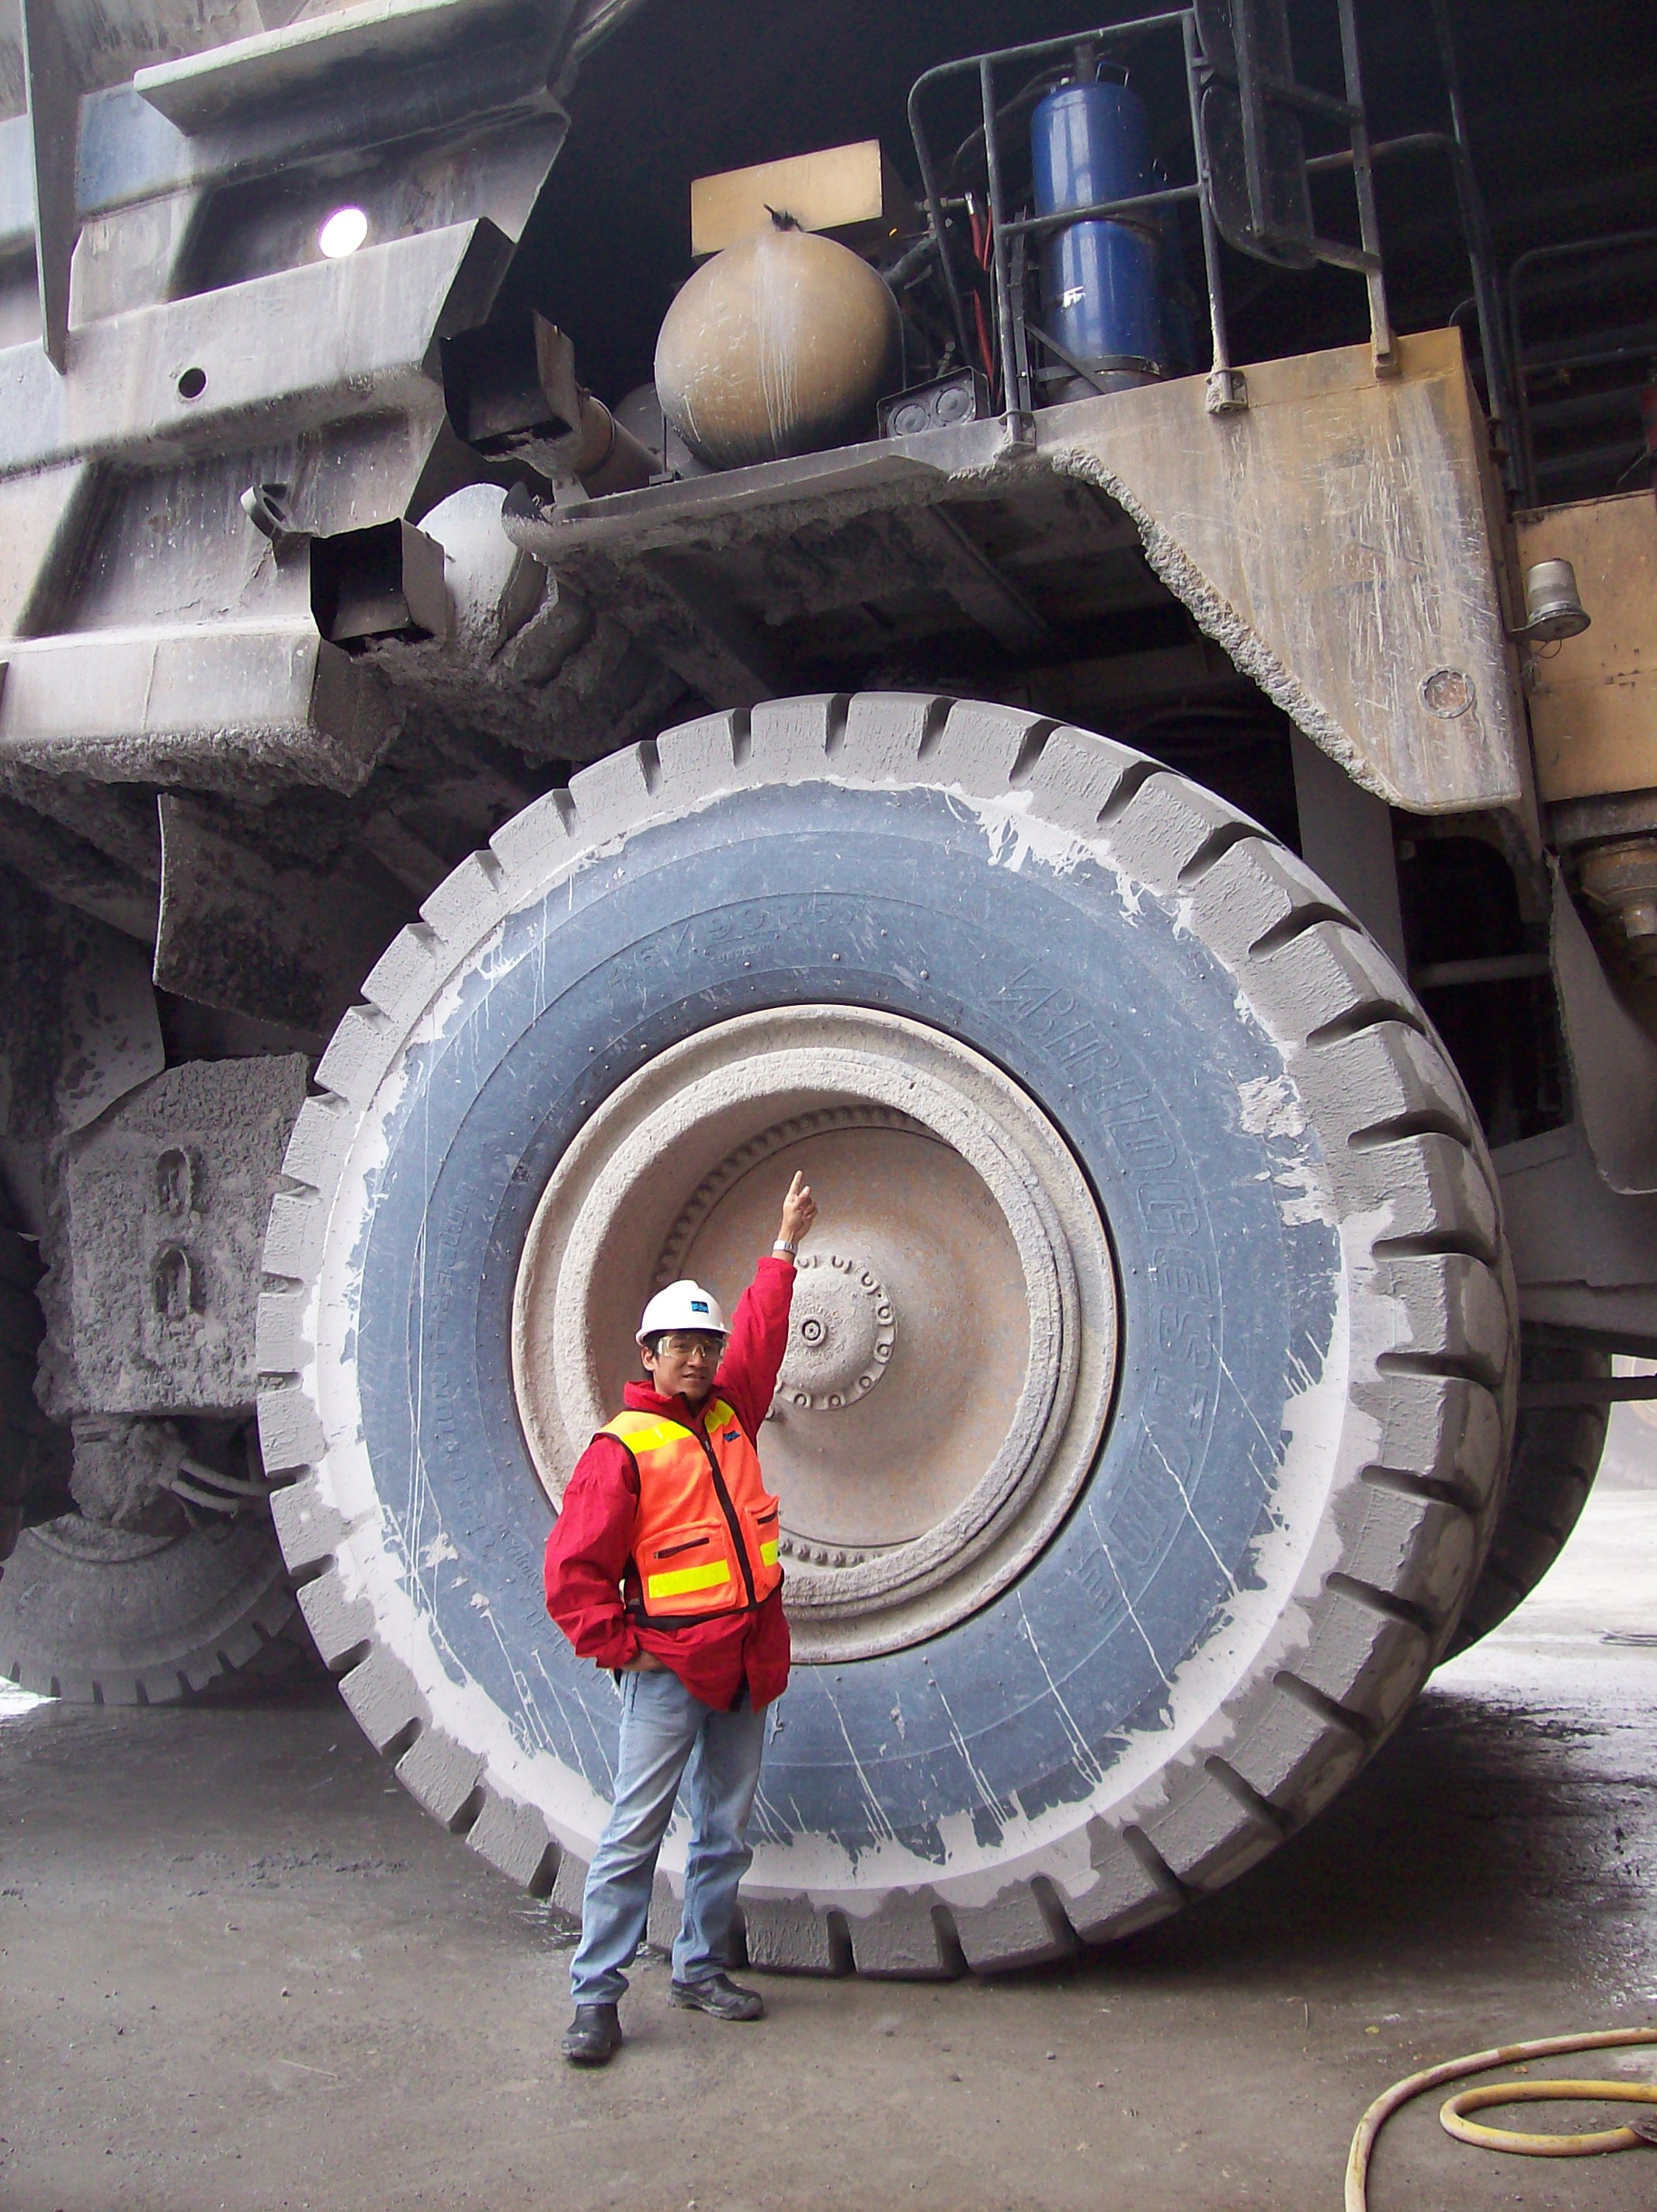 Me on the tire haul truck photo